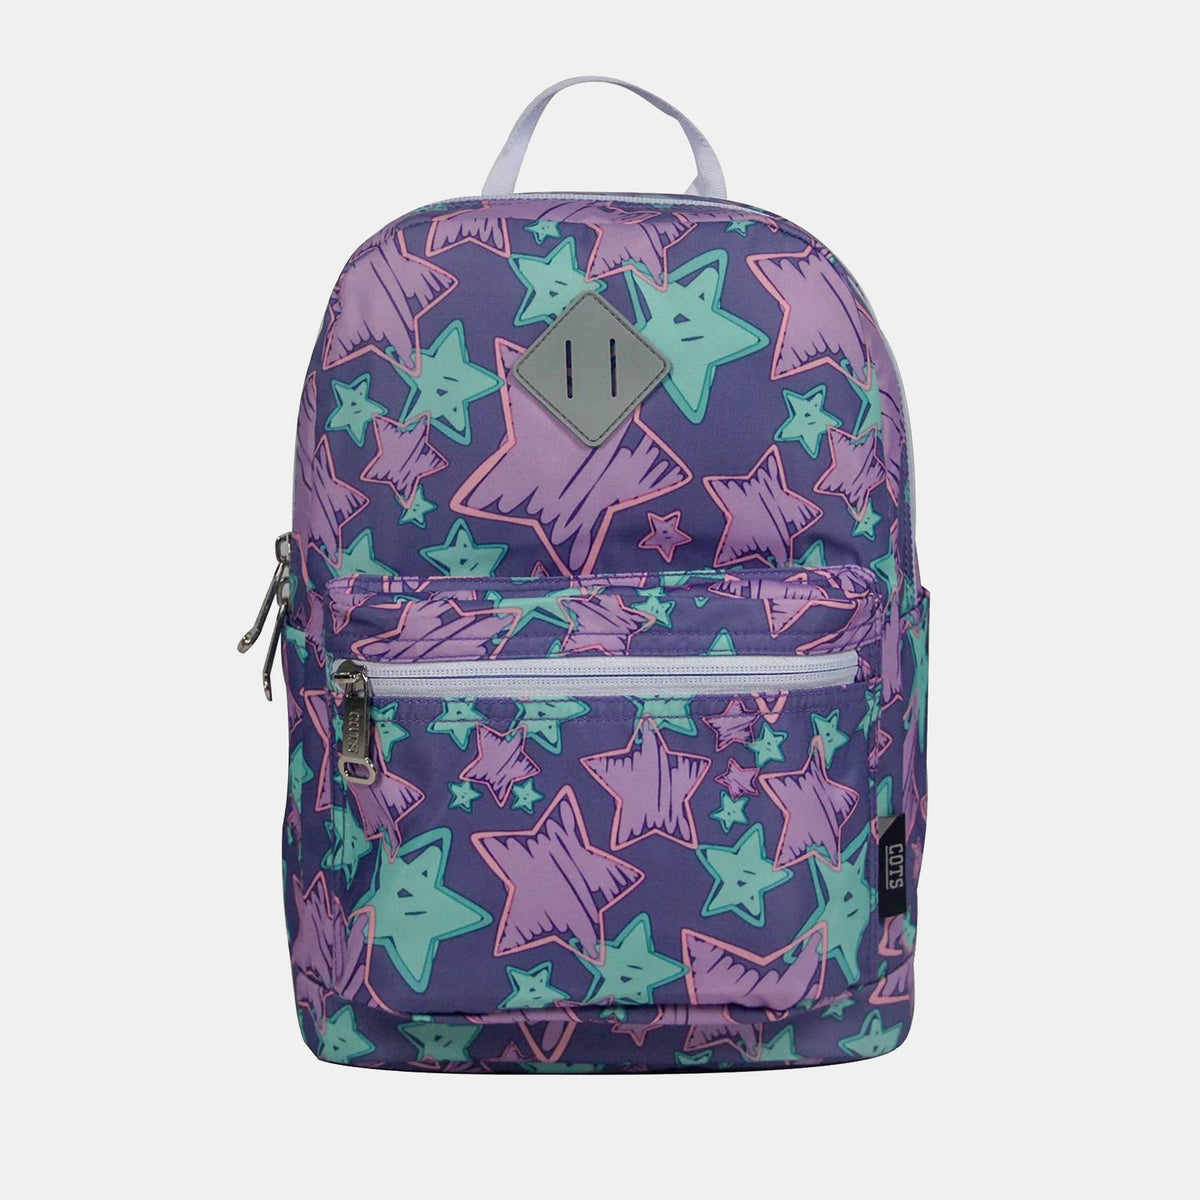 Twinkle Star Backpack for girls